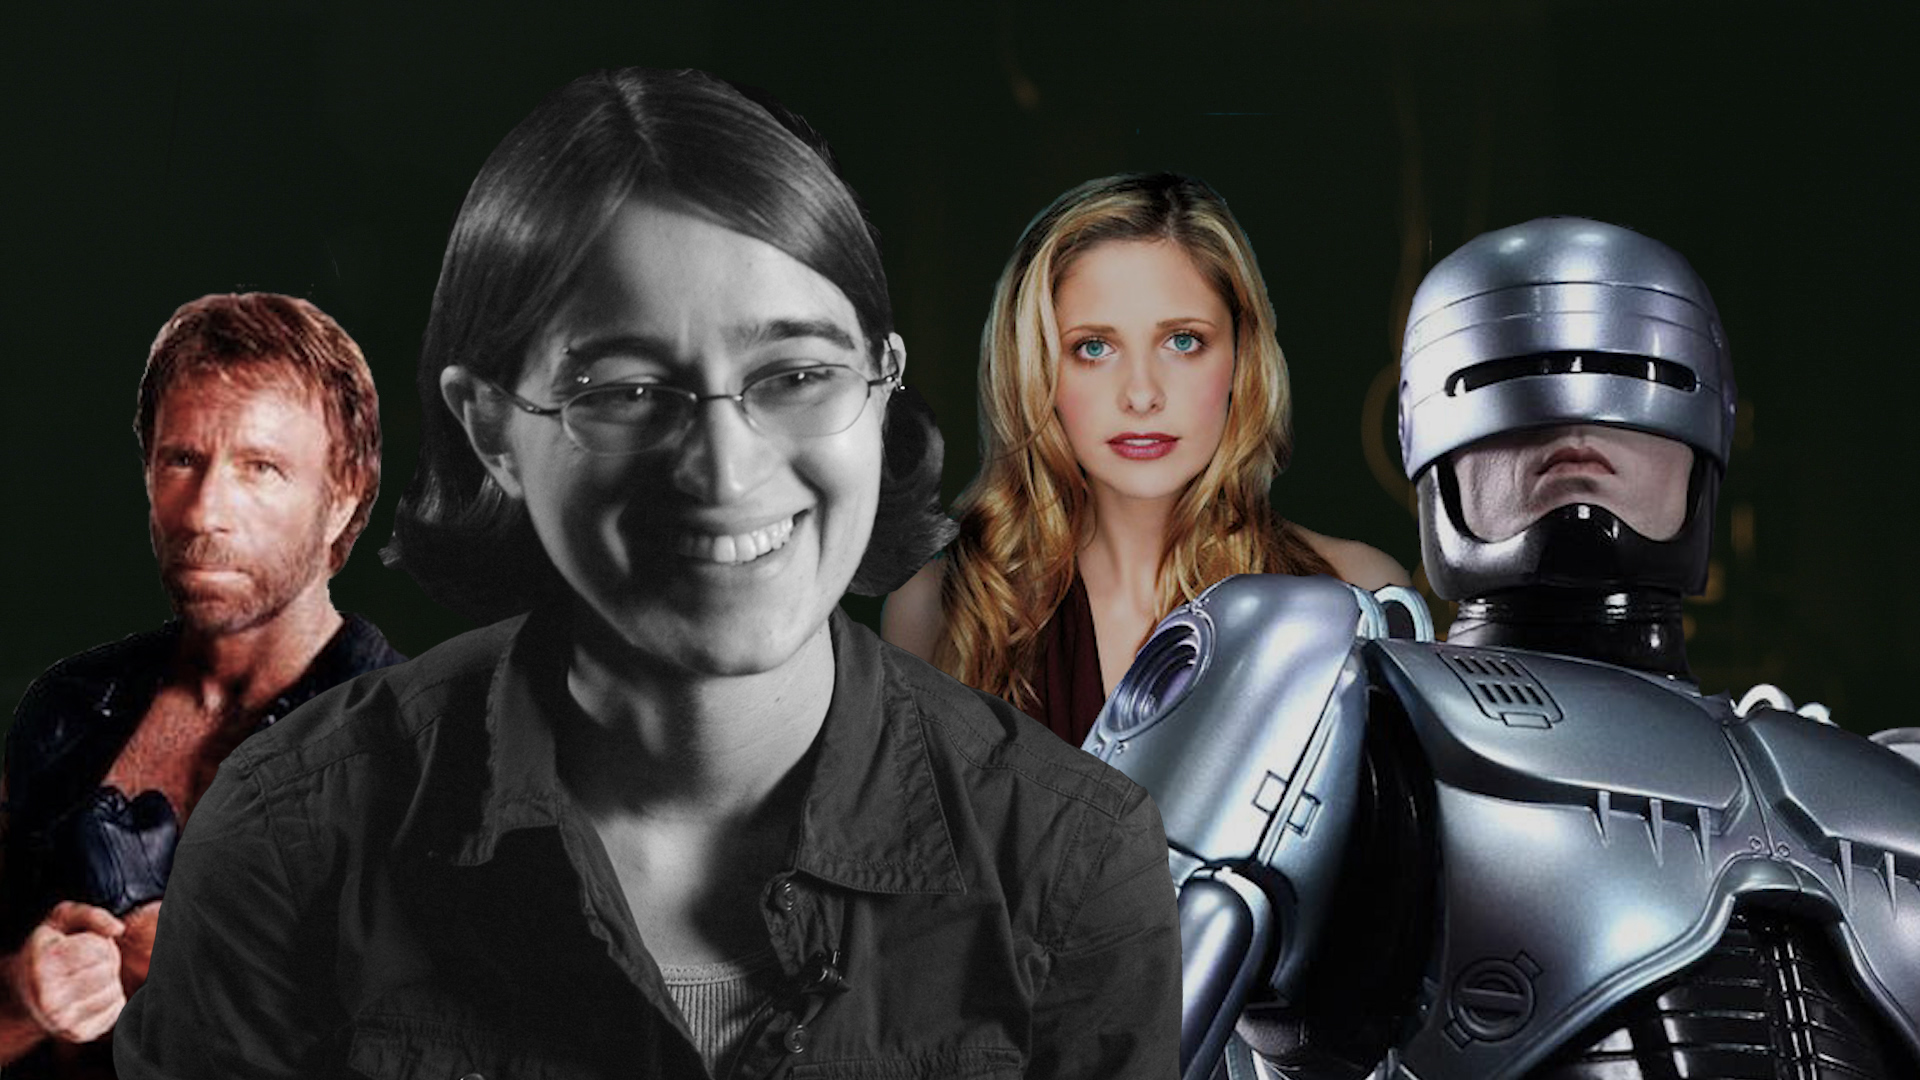 Images of Chuck Norris, the Buffybot and Robocop alongside researcher Lizz Thrall